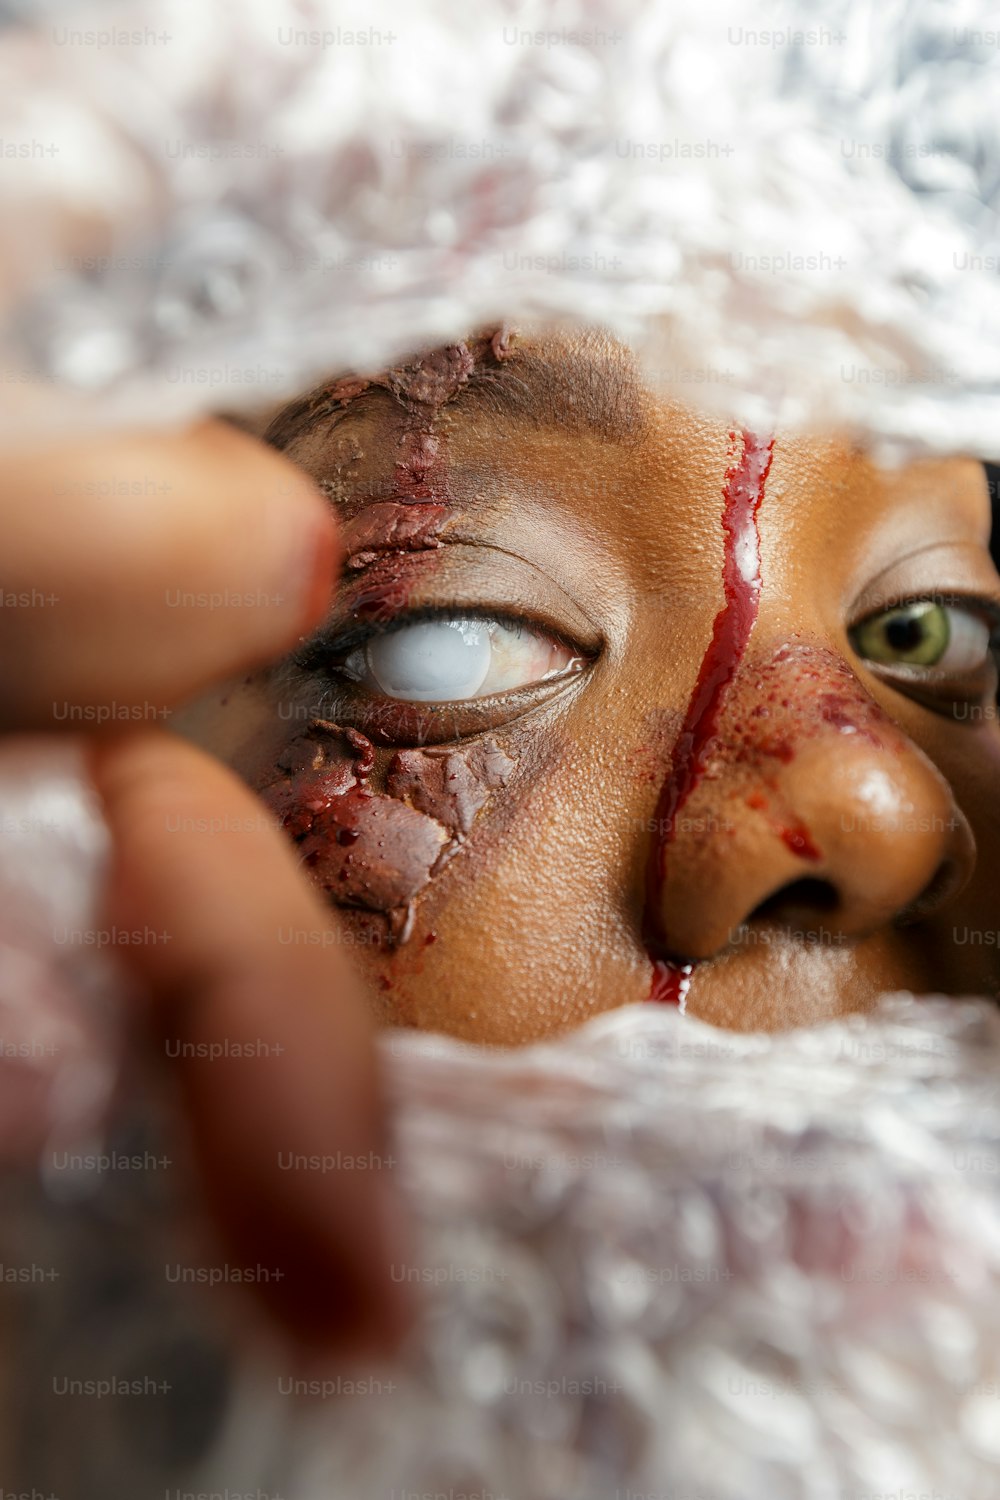 a close up of a person with blood on their face